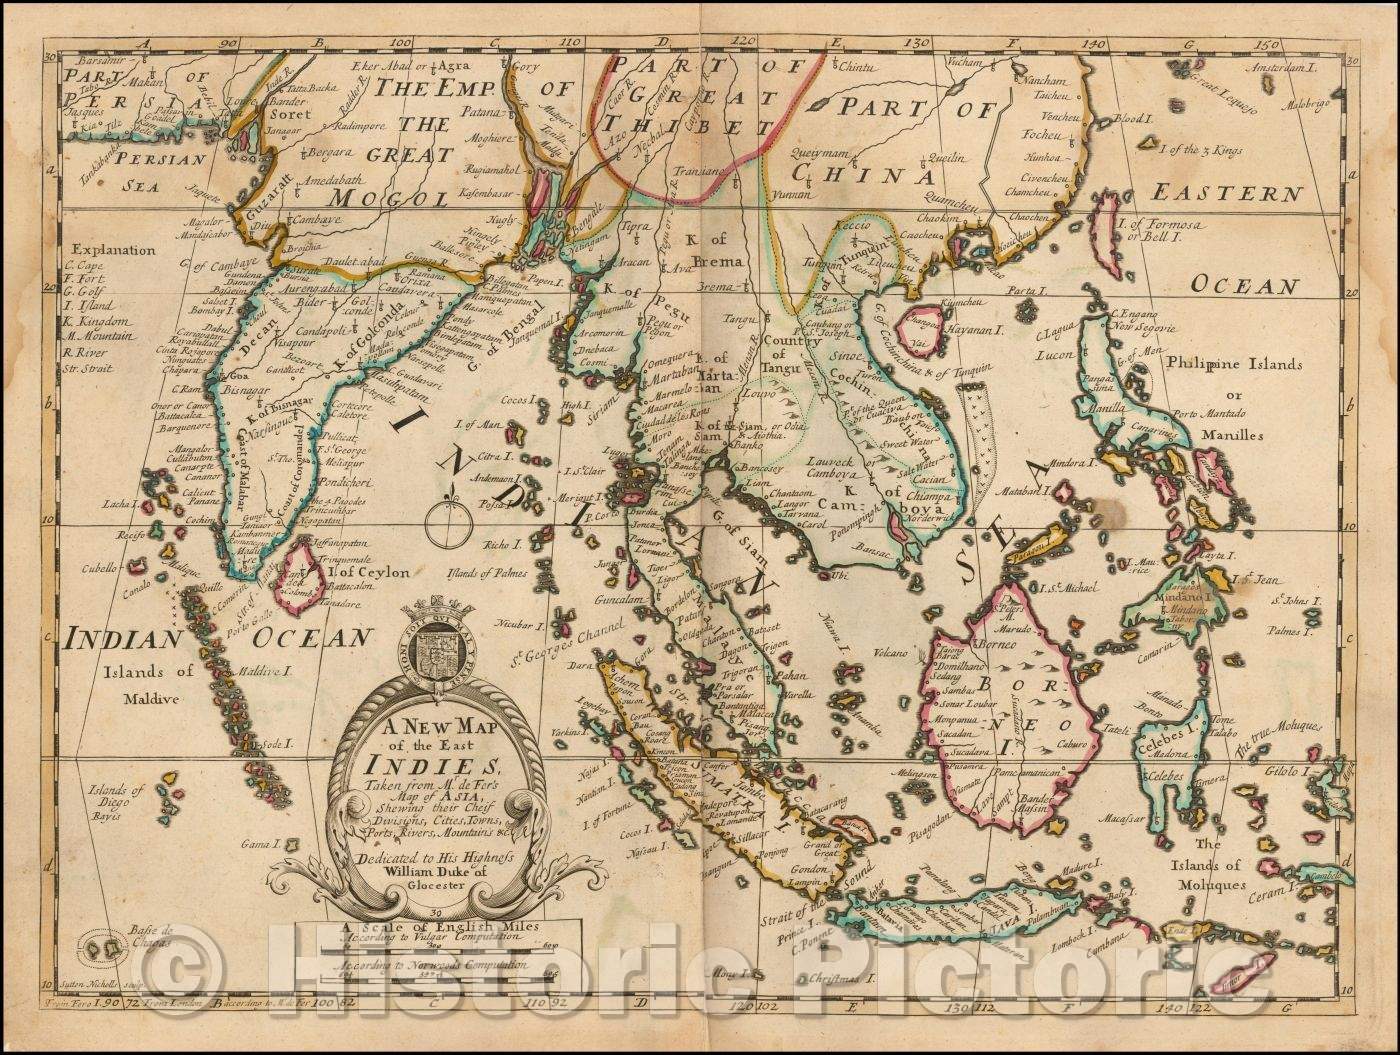 Historic Map - The East Indies, Taken from Mr. De Fer's Map of Asia, Shewing their Chief Divisions, 1700, Edward Wells - Vintage Wall Art